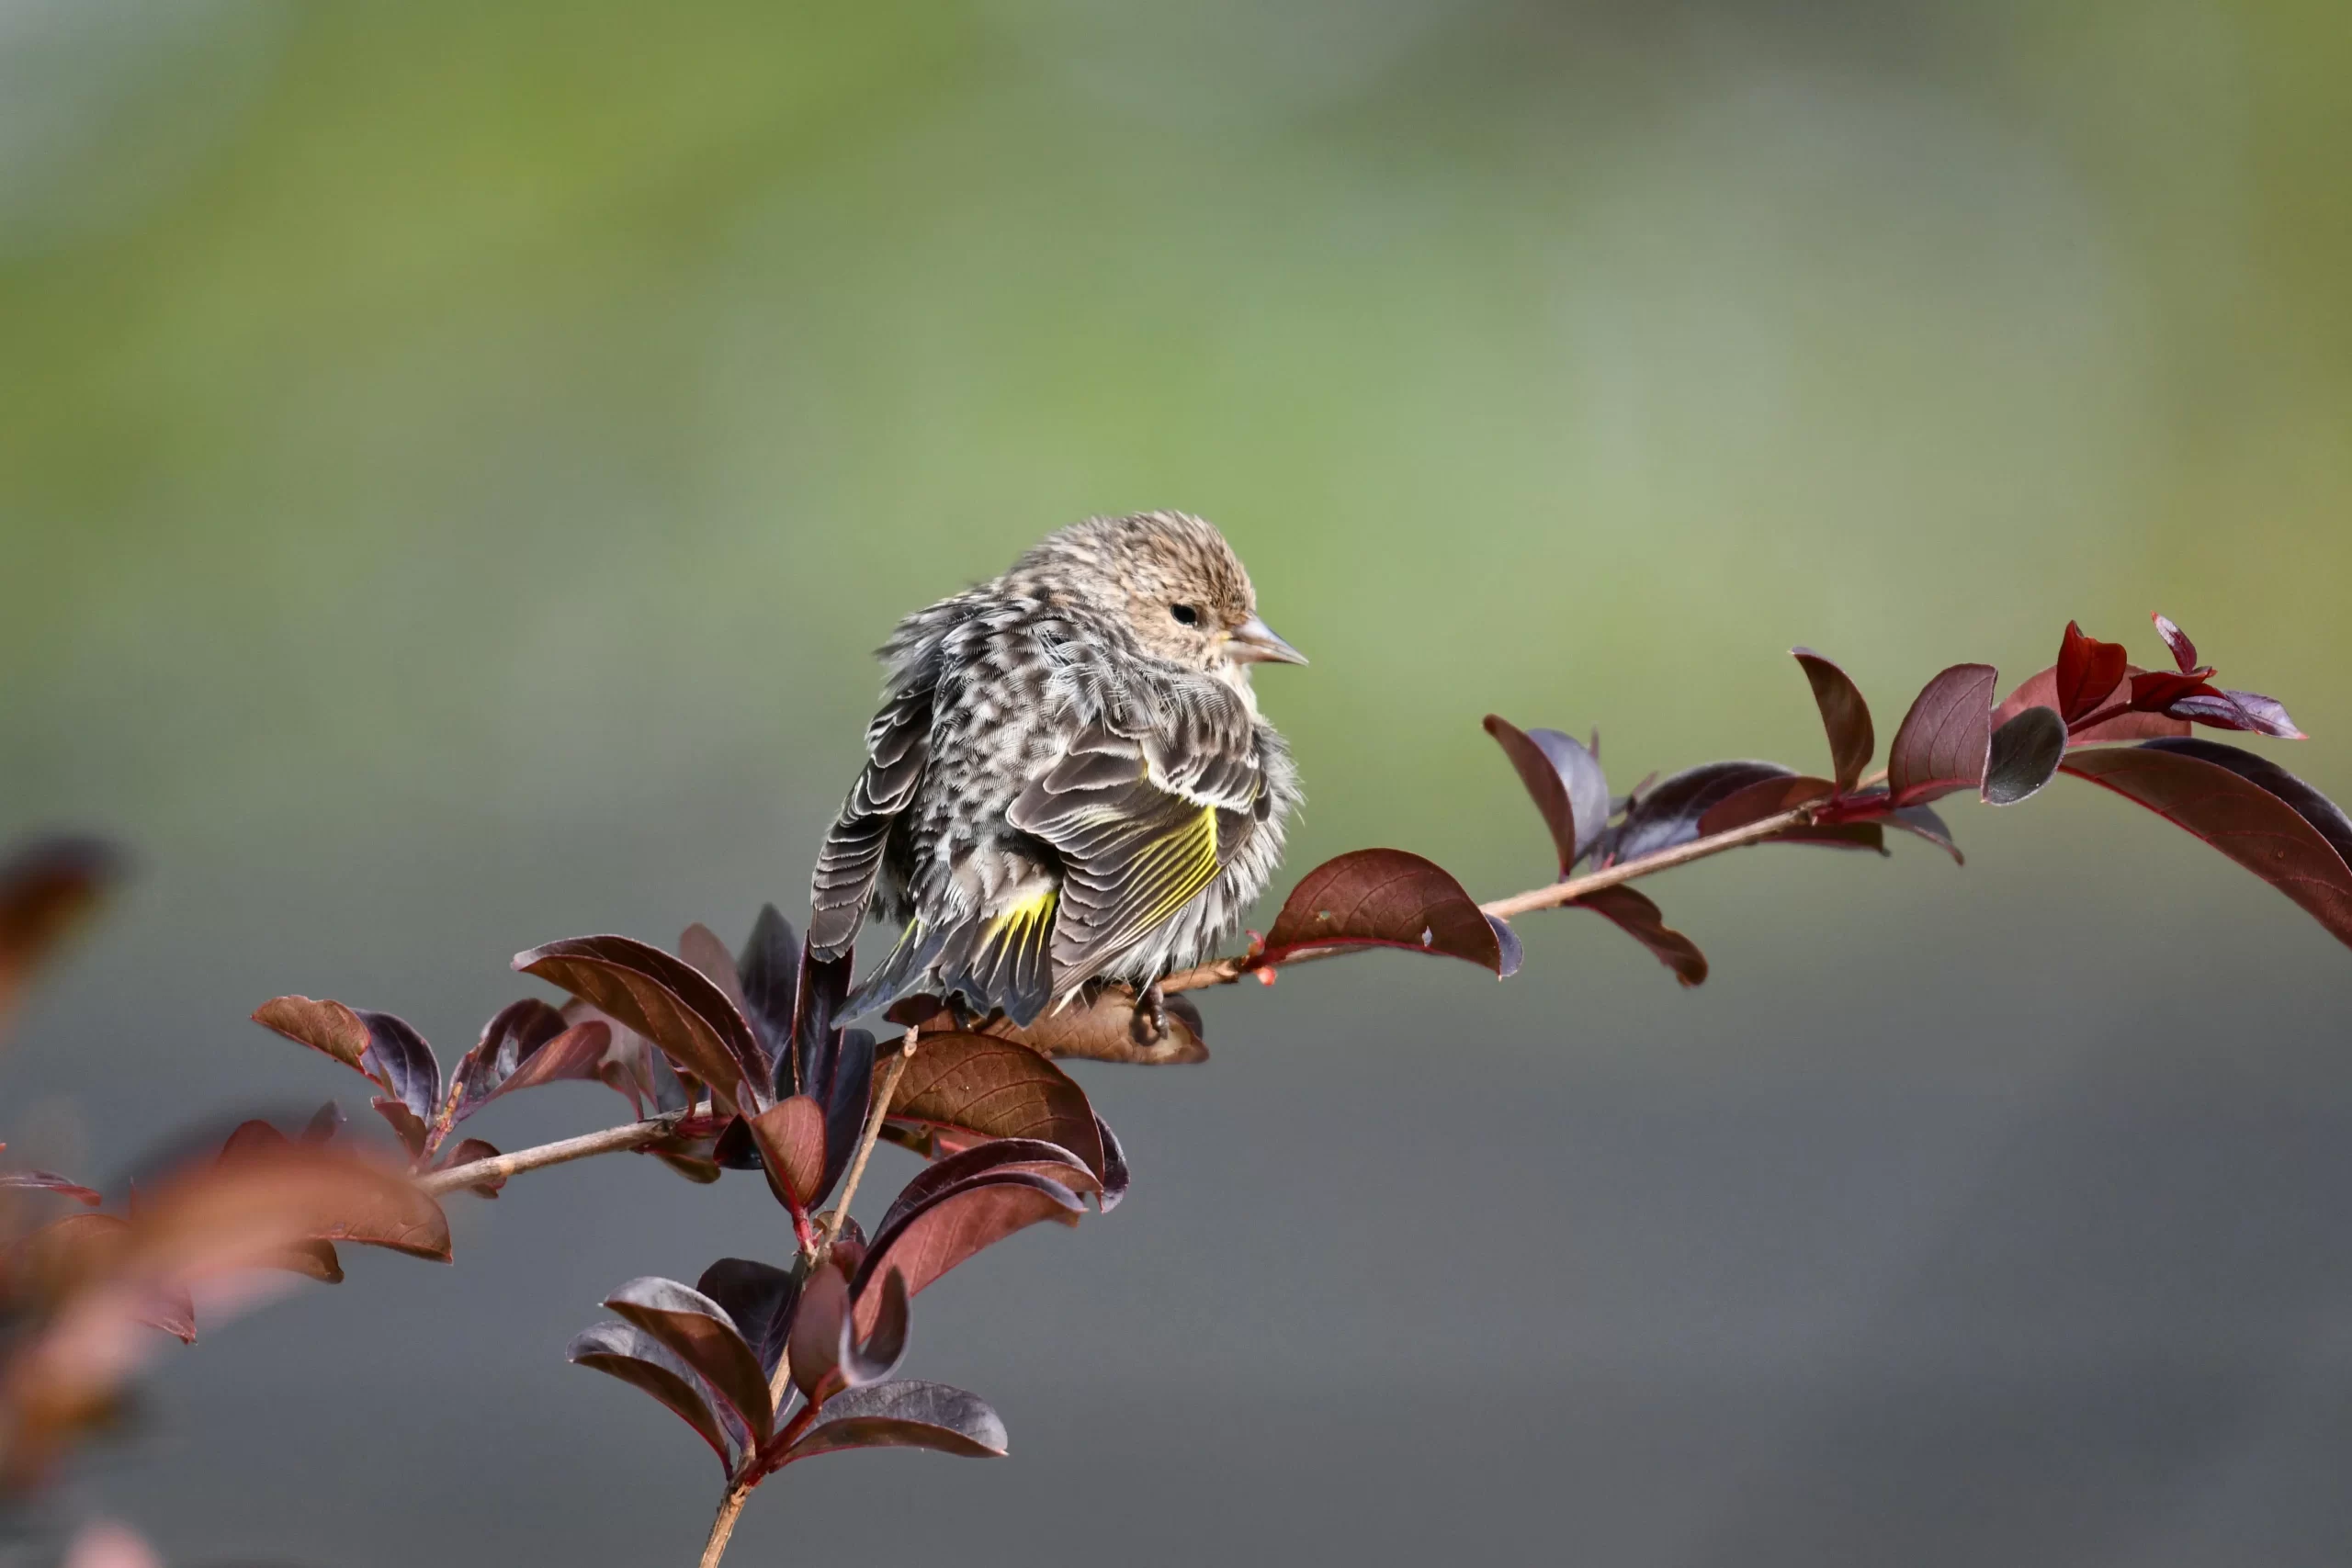 A Pine Siskin perches on a branch with leaves. Pine Siskins are one of 5 common finches in Georgia.